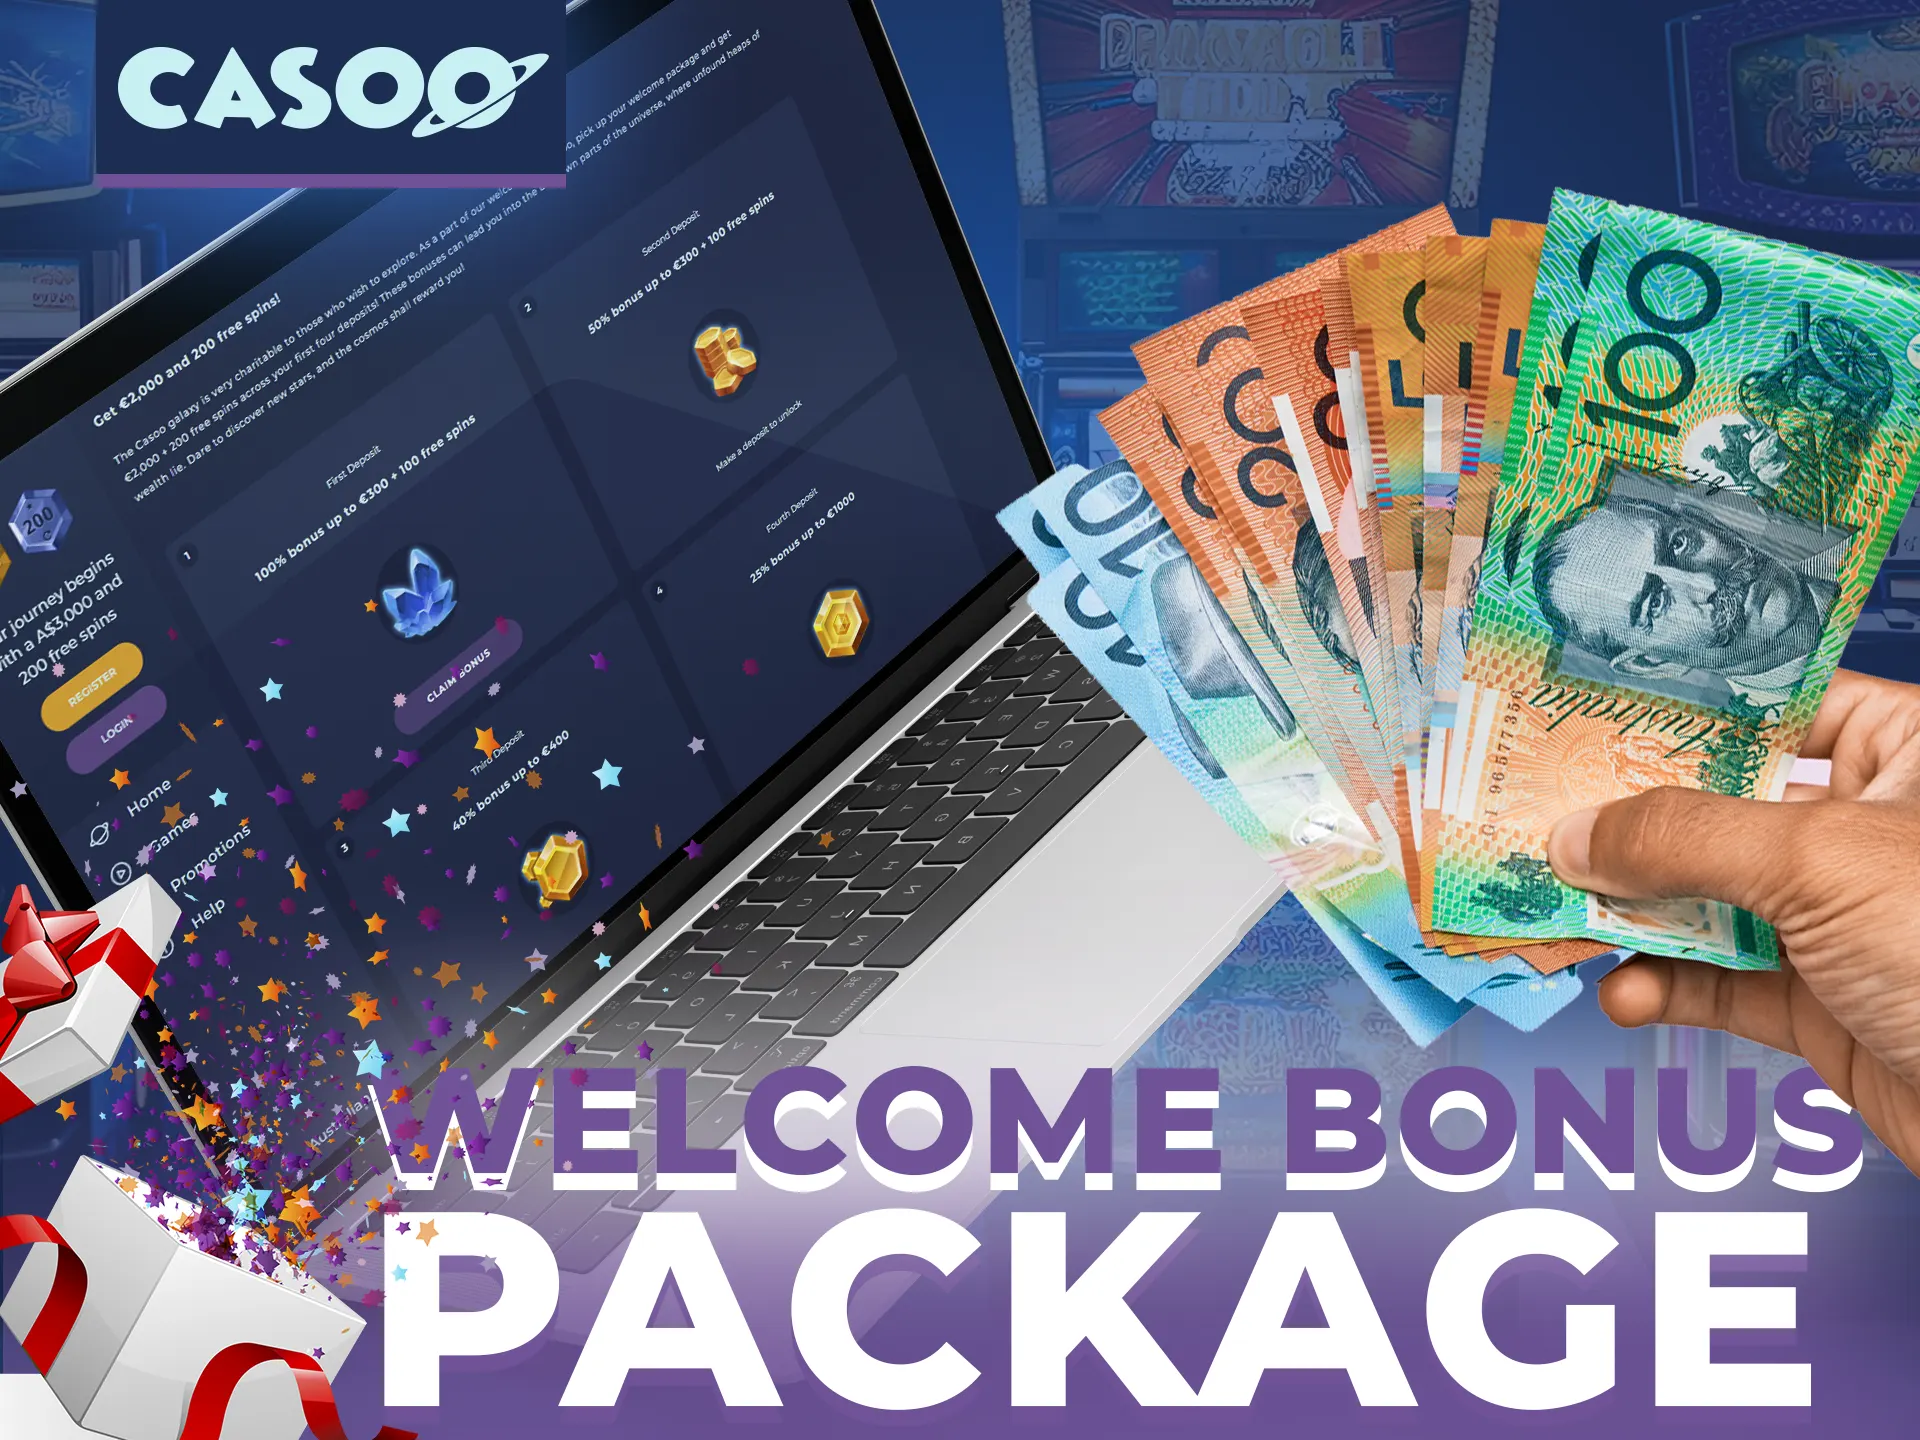 Enjoy big bonuses with welcome package at Casoo casino